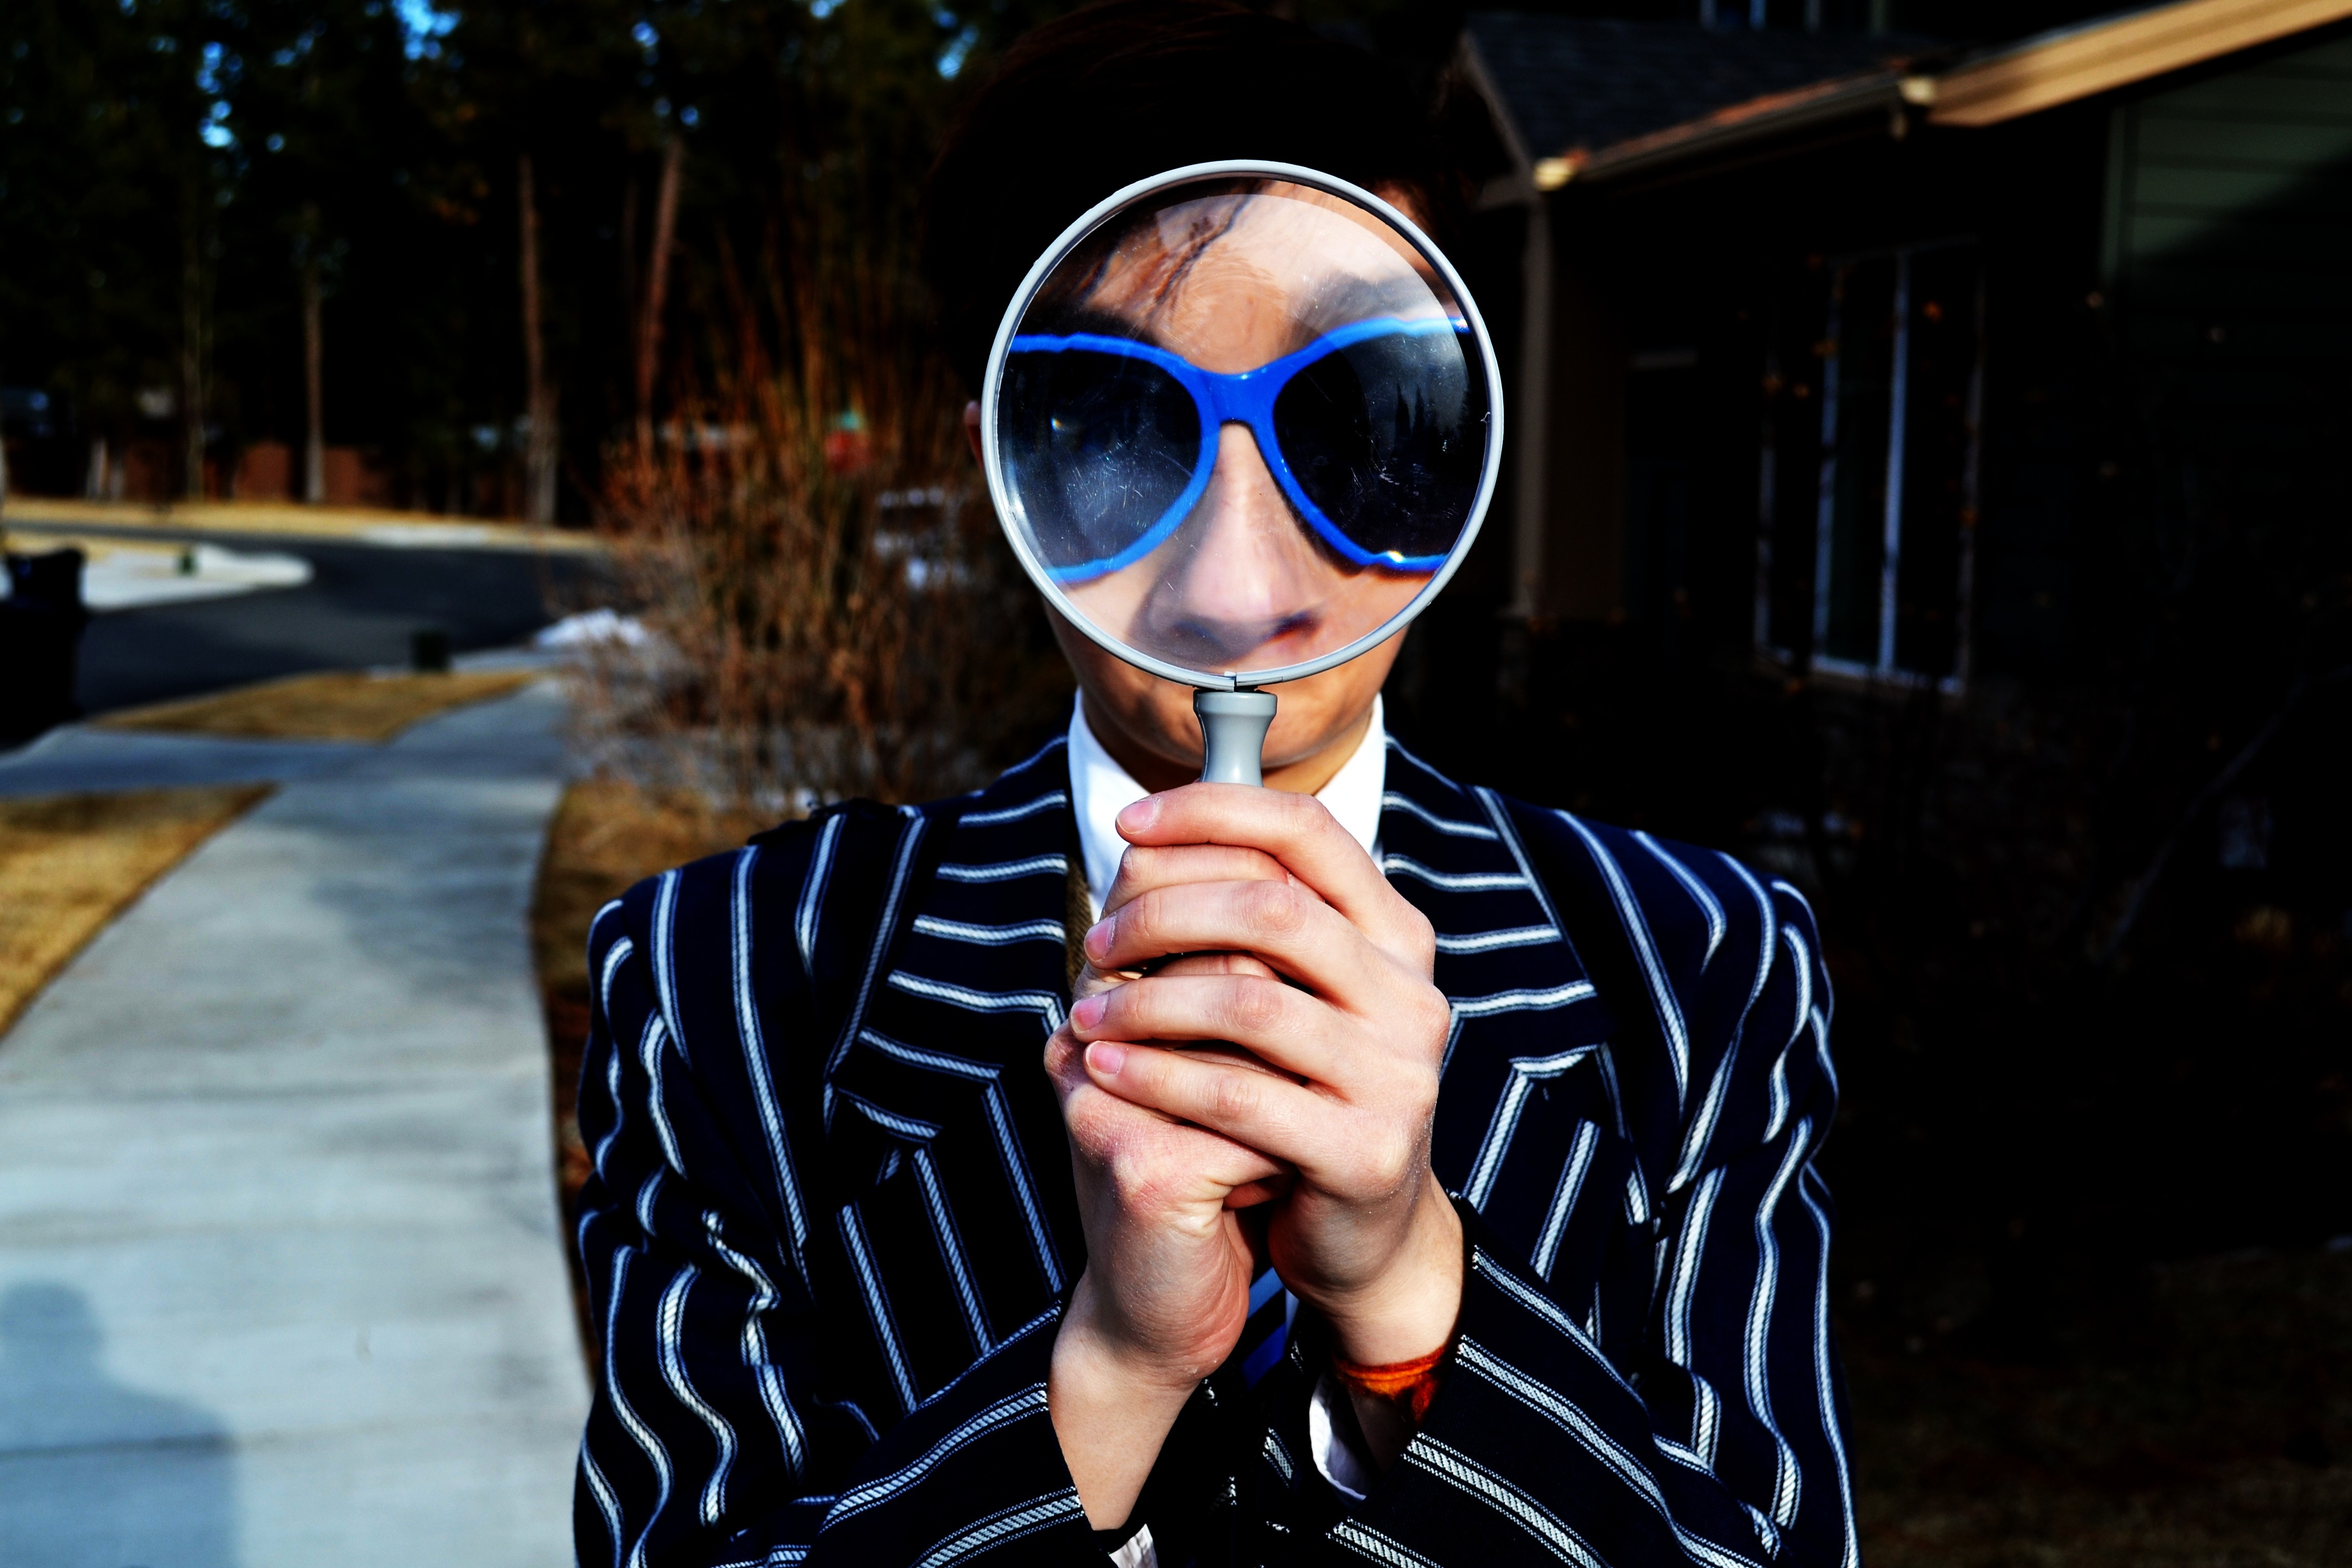 photo of person in suit coat and sunglasses looking through handheld magnifying glass